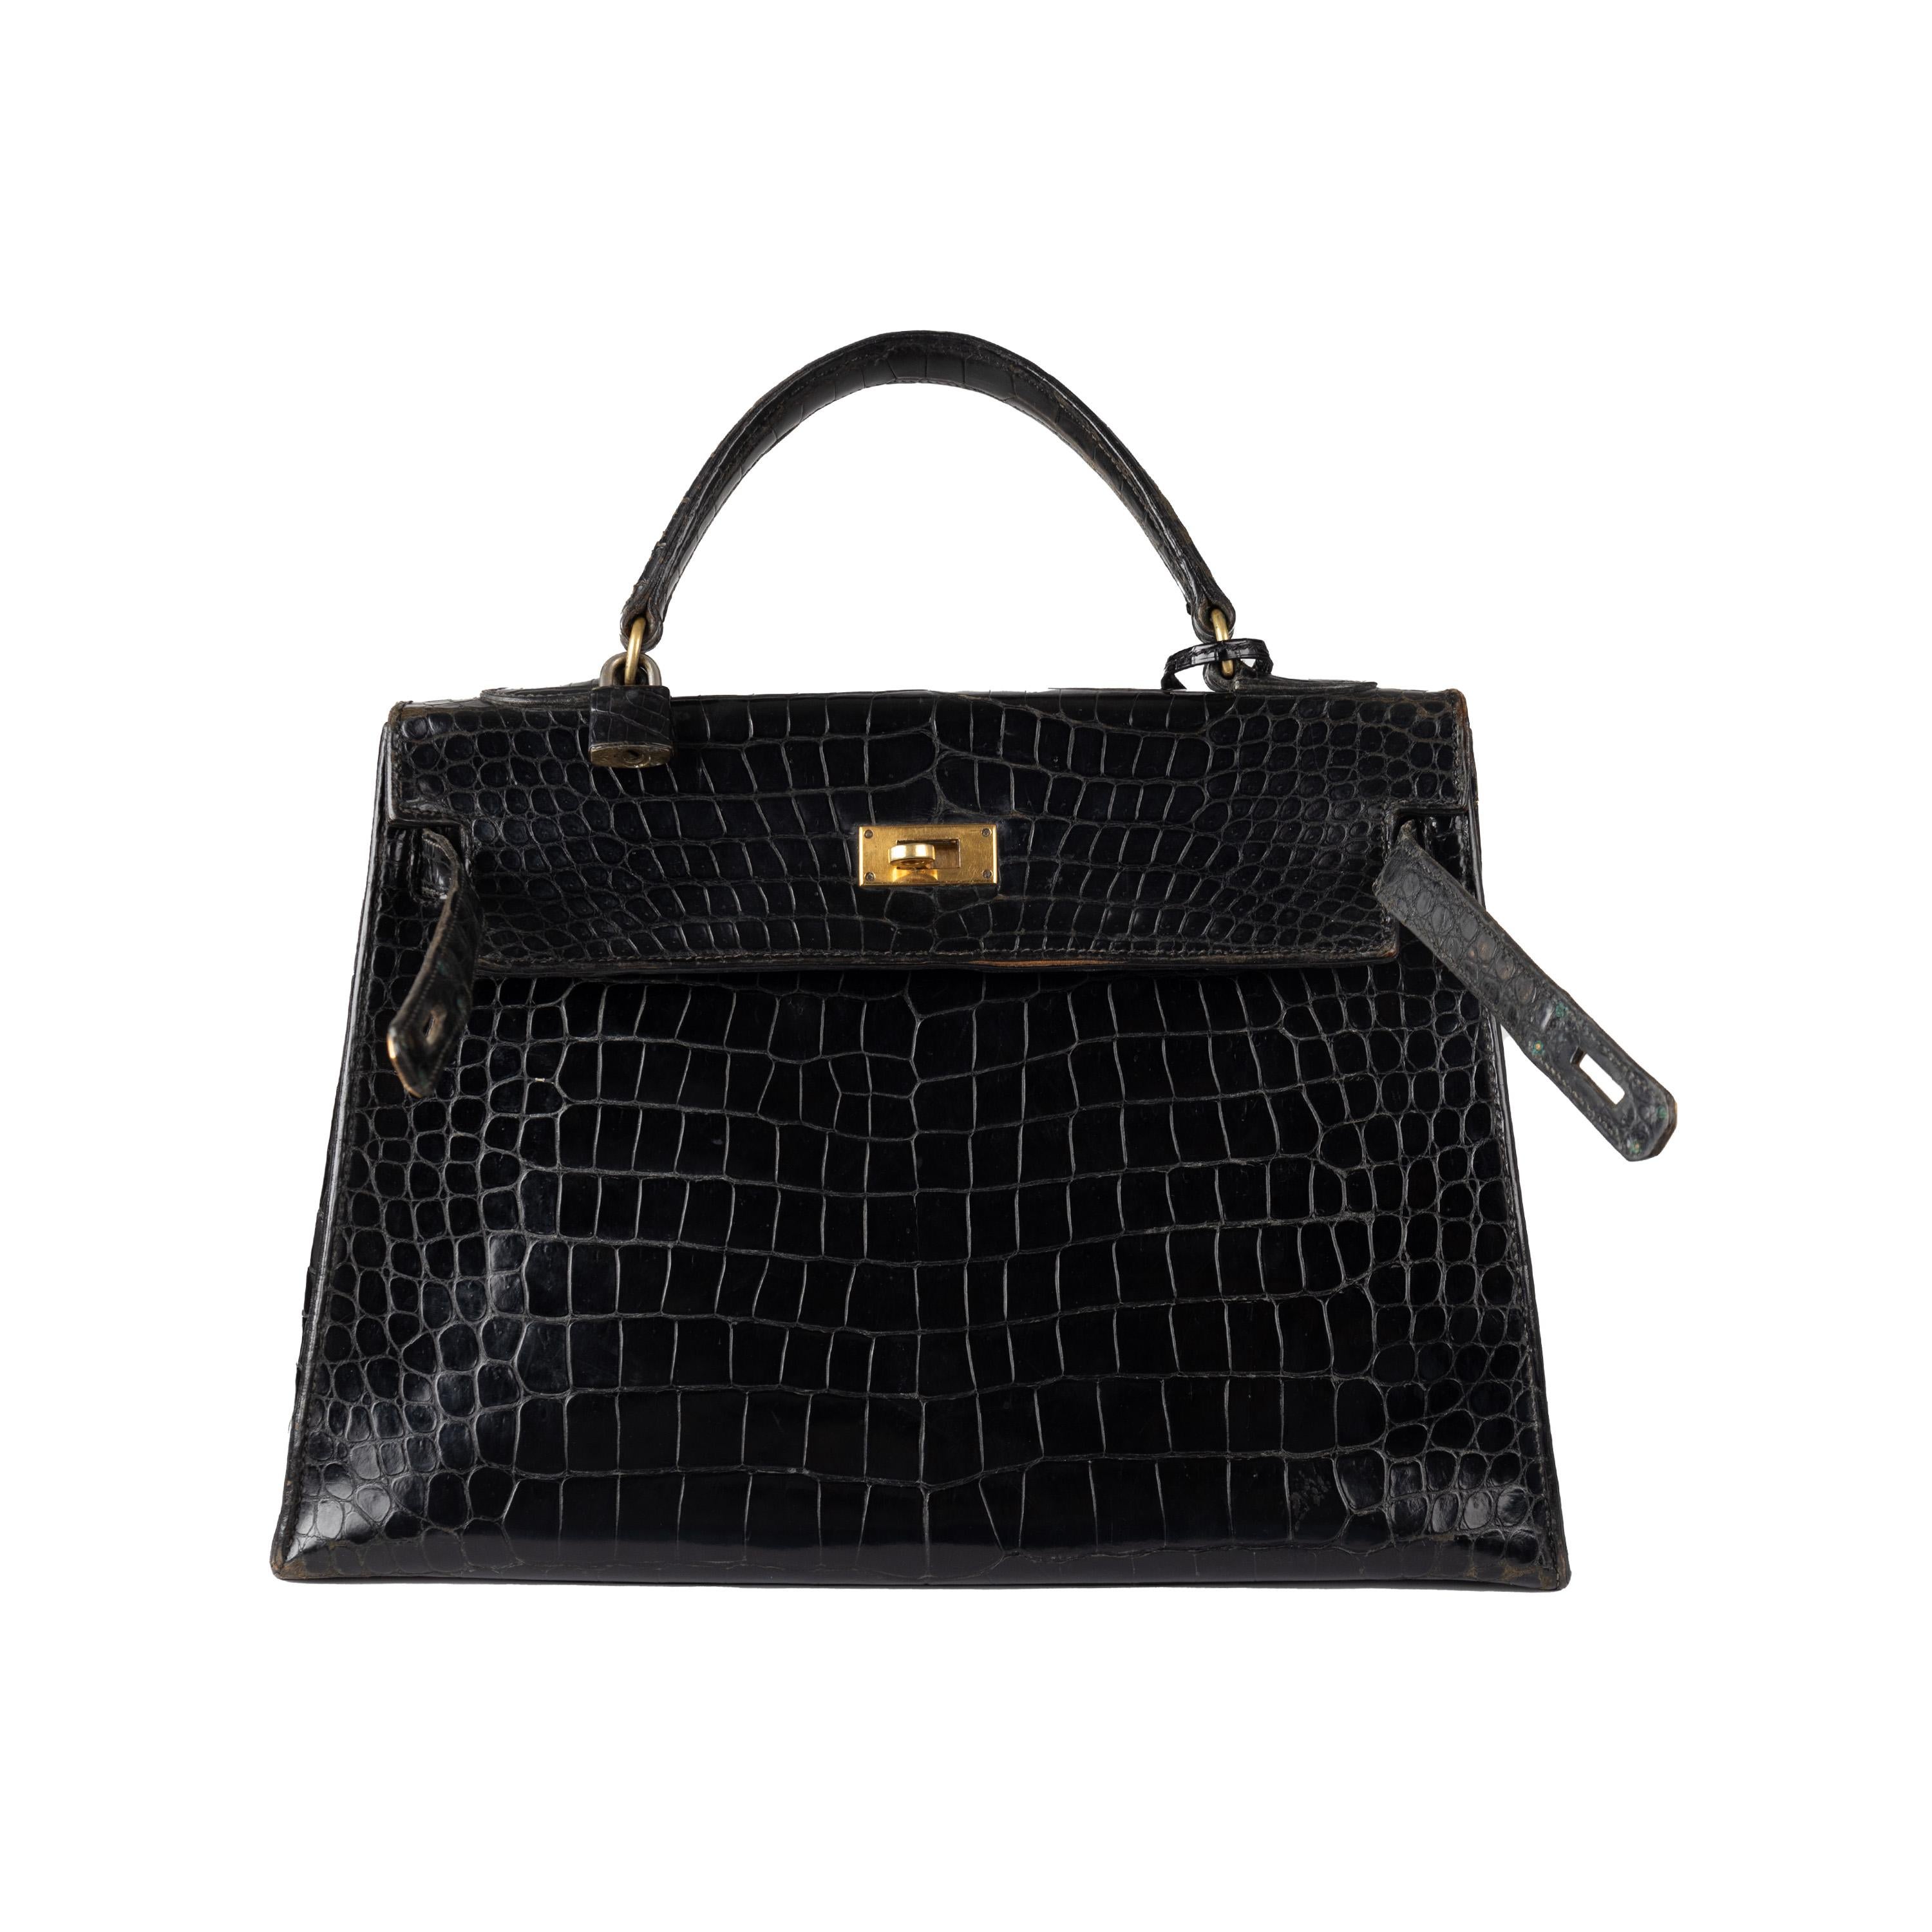 This rare and exquisite Hermès Lisse Crocodile Kelly 32 Retourne Handbag is a vintage treasure from the '60s. Crafted from Porosus Crocodile Lisse with a special agate polishing technique to make its glossy black exterior shine, its gold plated